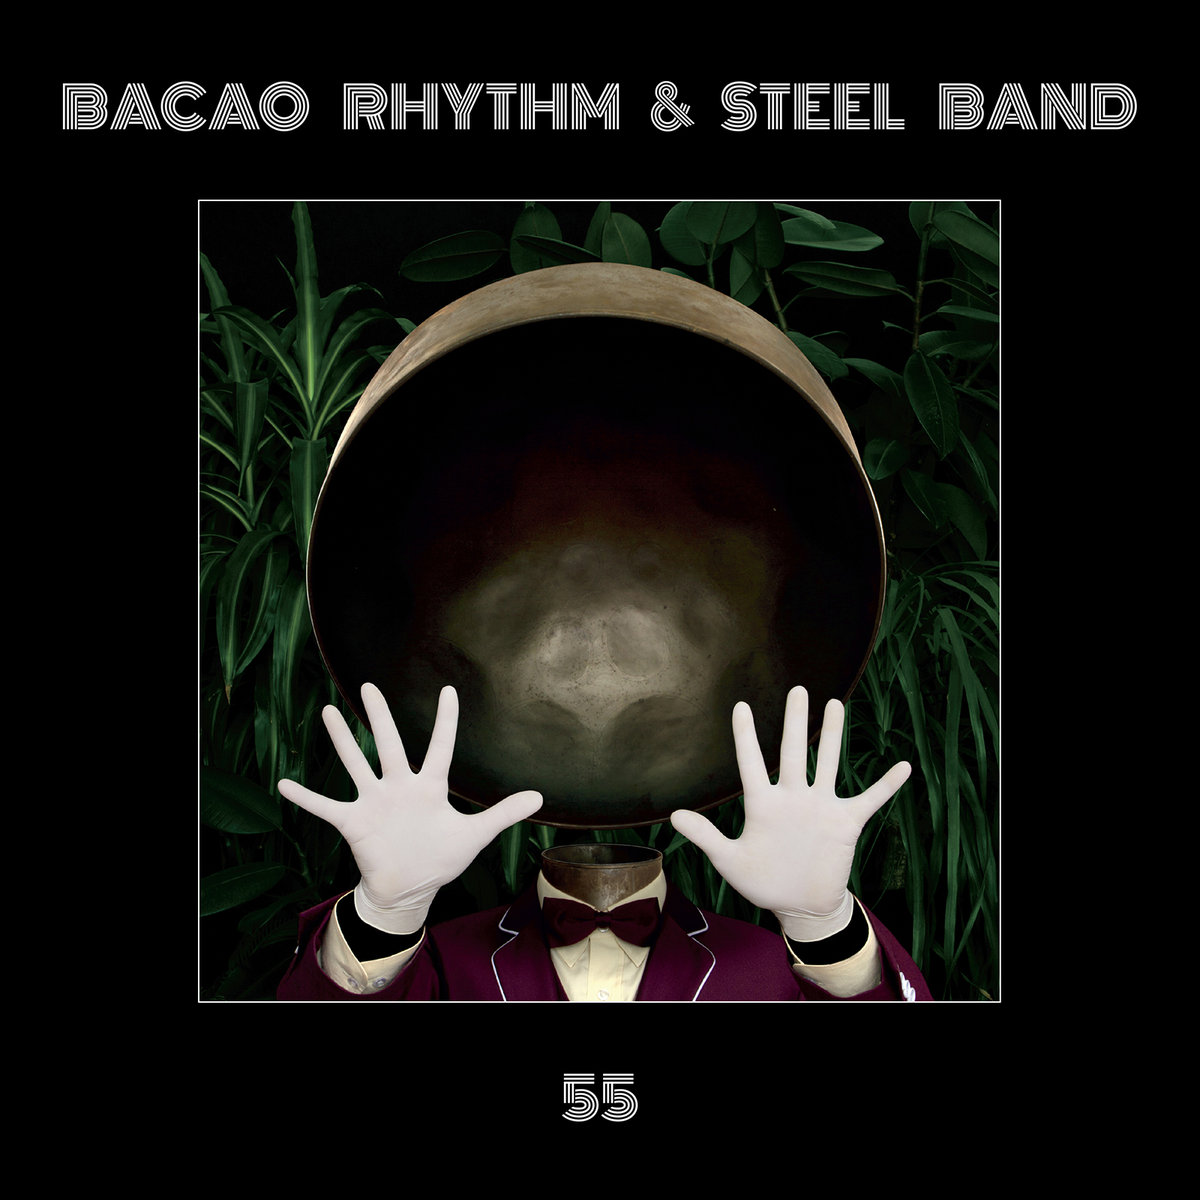 The bacao rhythm and steel band members